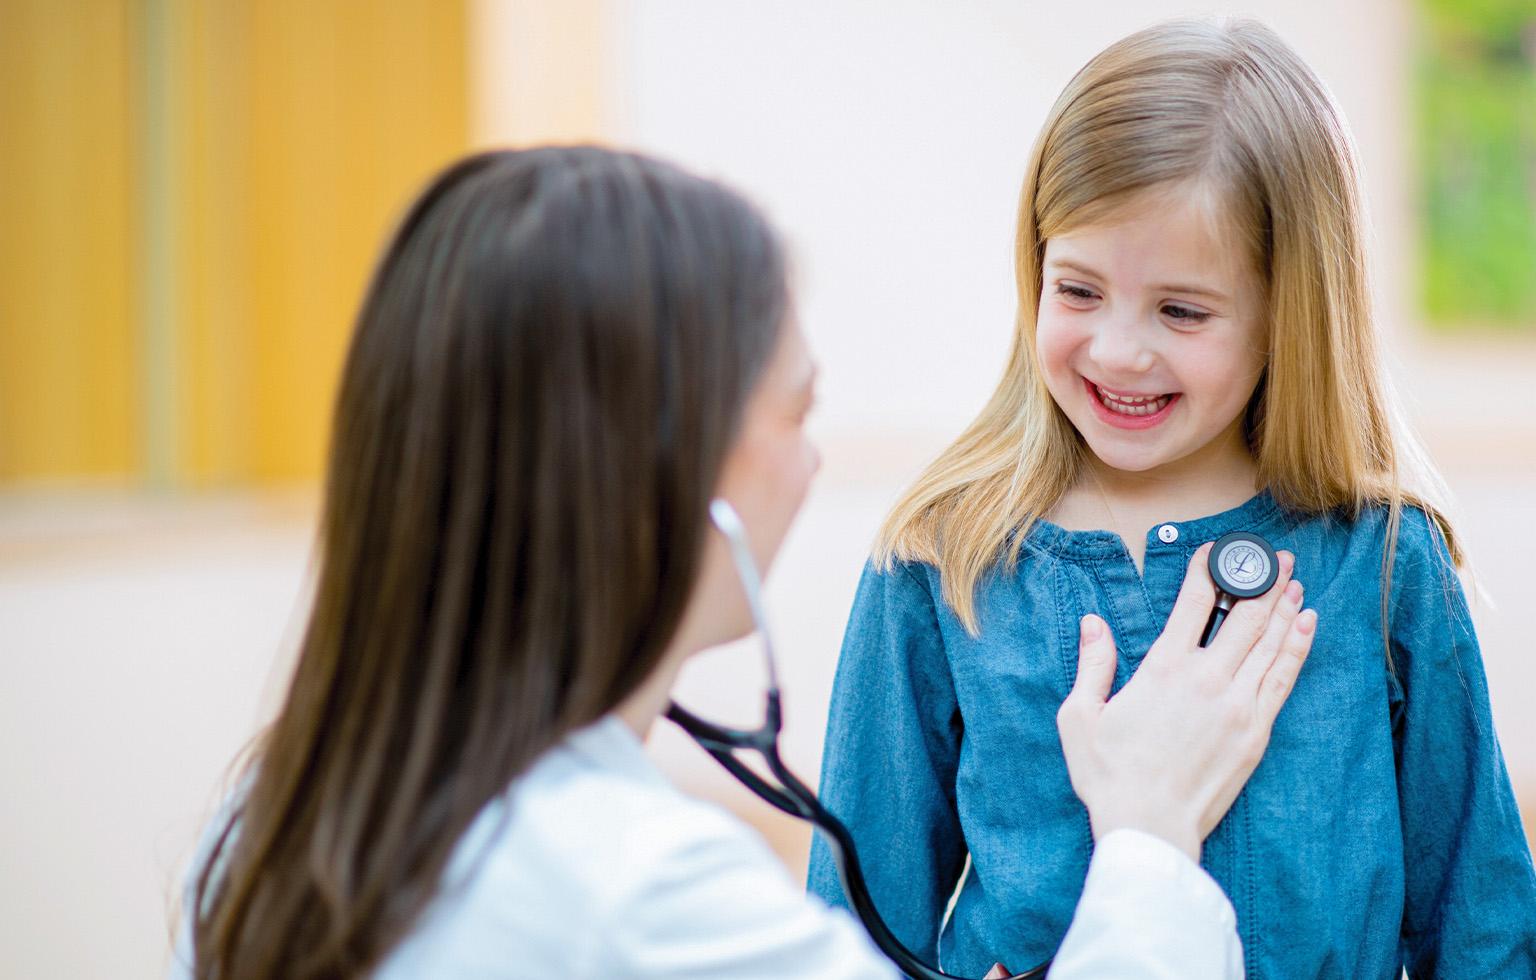 Emplify Health provider Kim Breidenbach listening to young girl's heartbeat with stethoscope. 